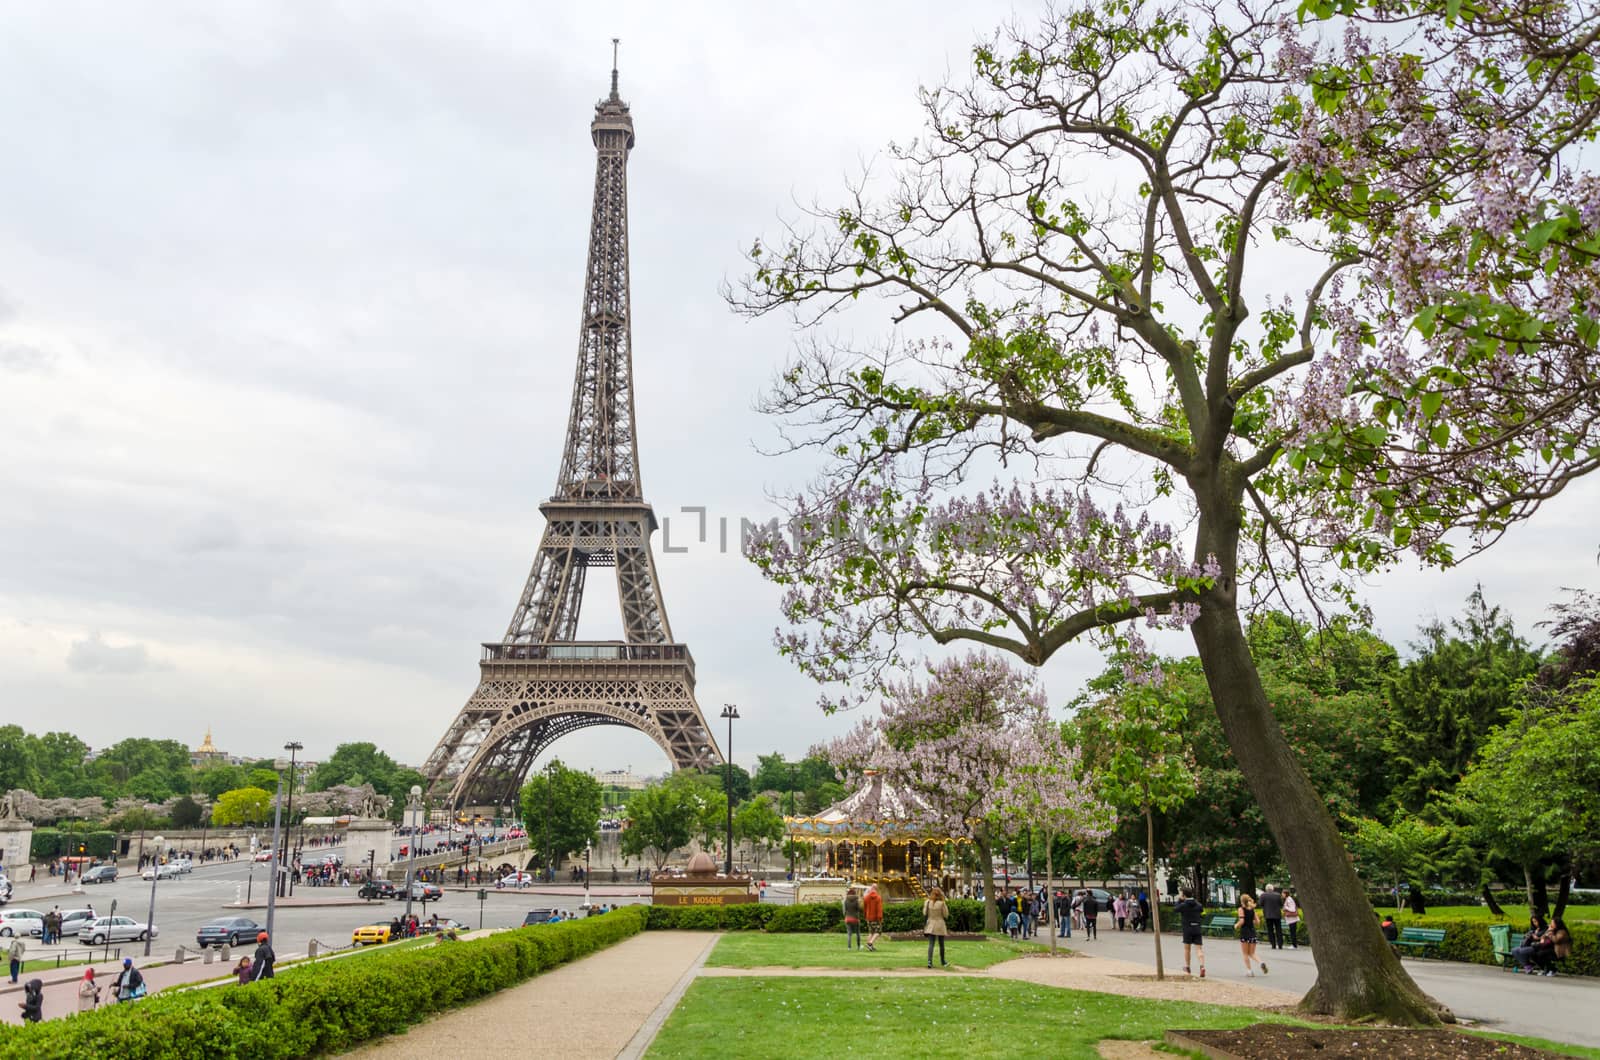 Paris, France - May 15, 2015: Tourist visit Eiffel Tower View from Esplanade du Trocadero by siraanamwong